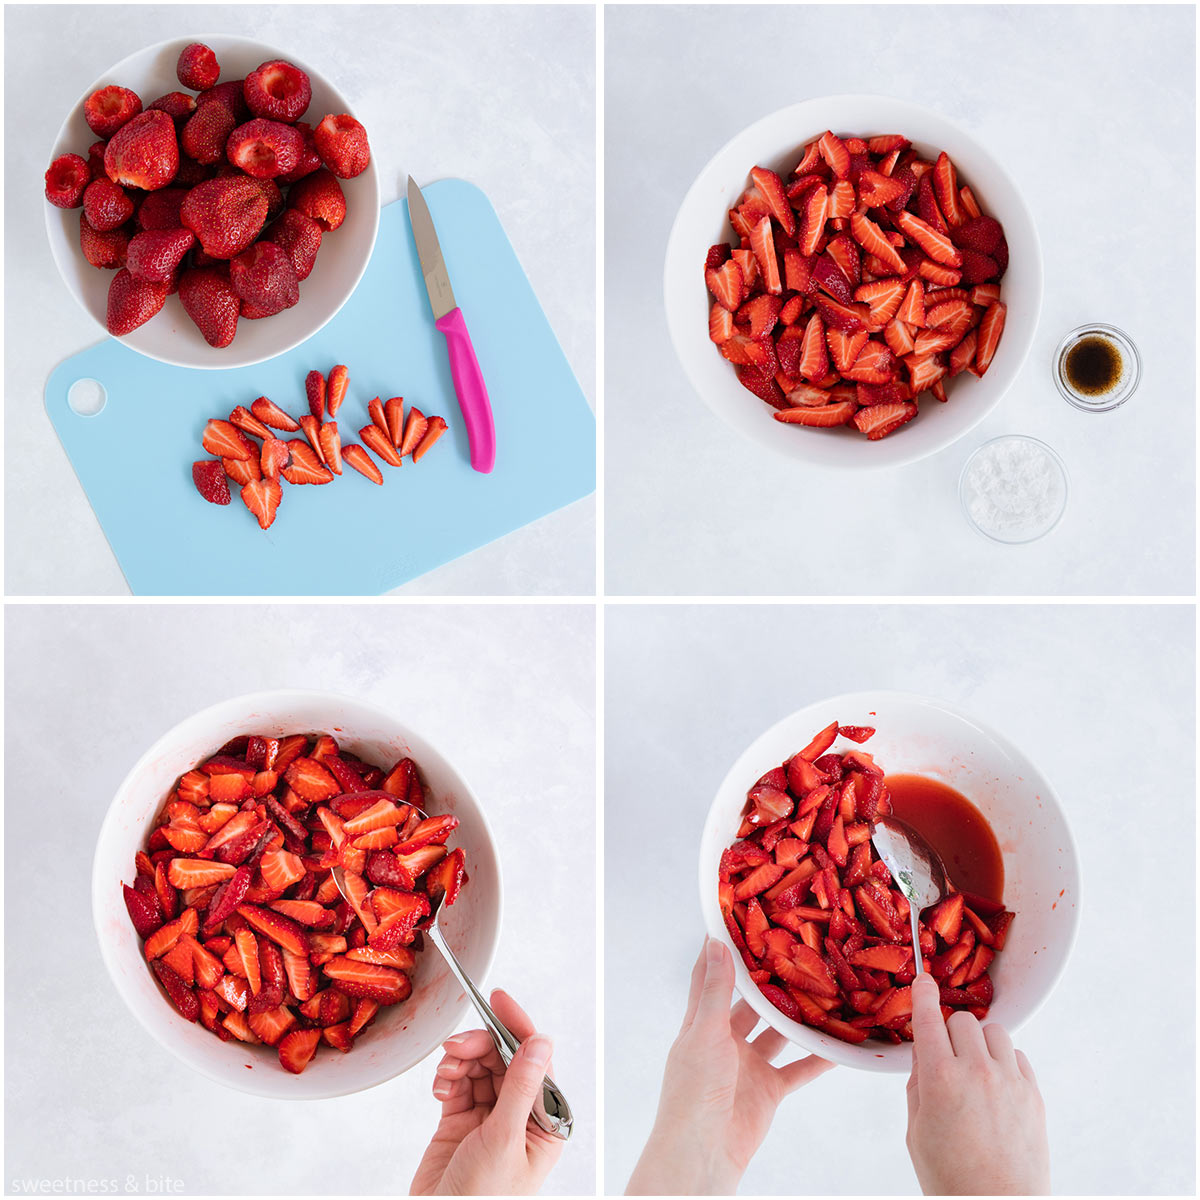 Collage of four images showing the strawberries being chopped and mixed with sugar and vanilla.